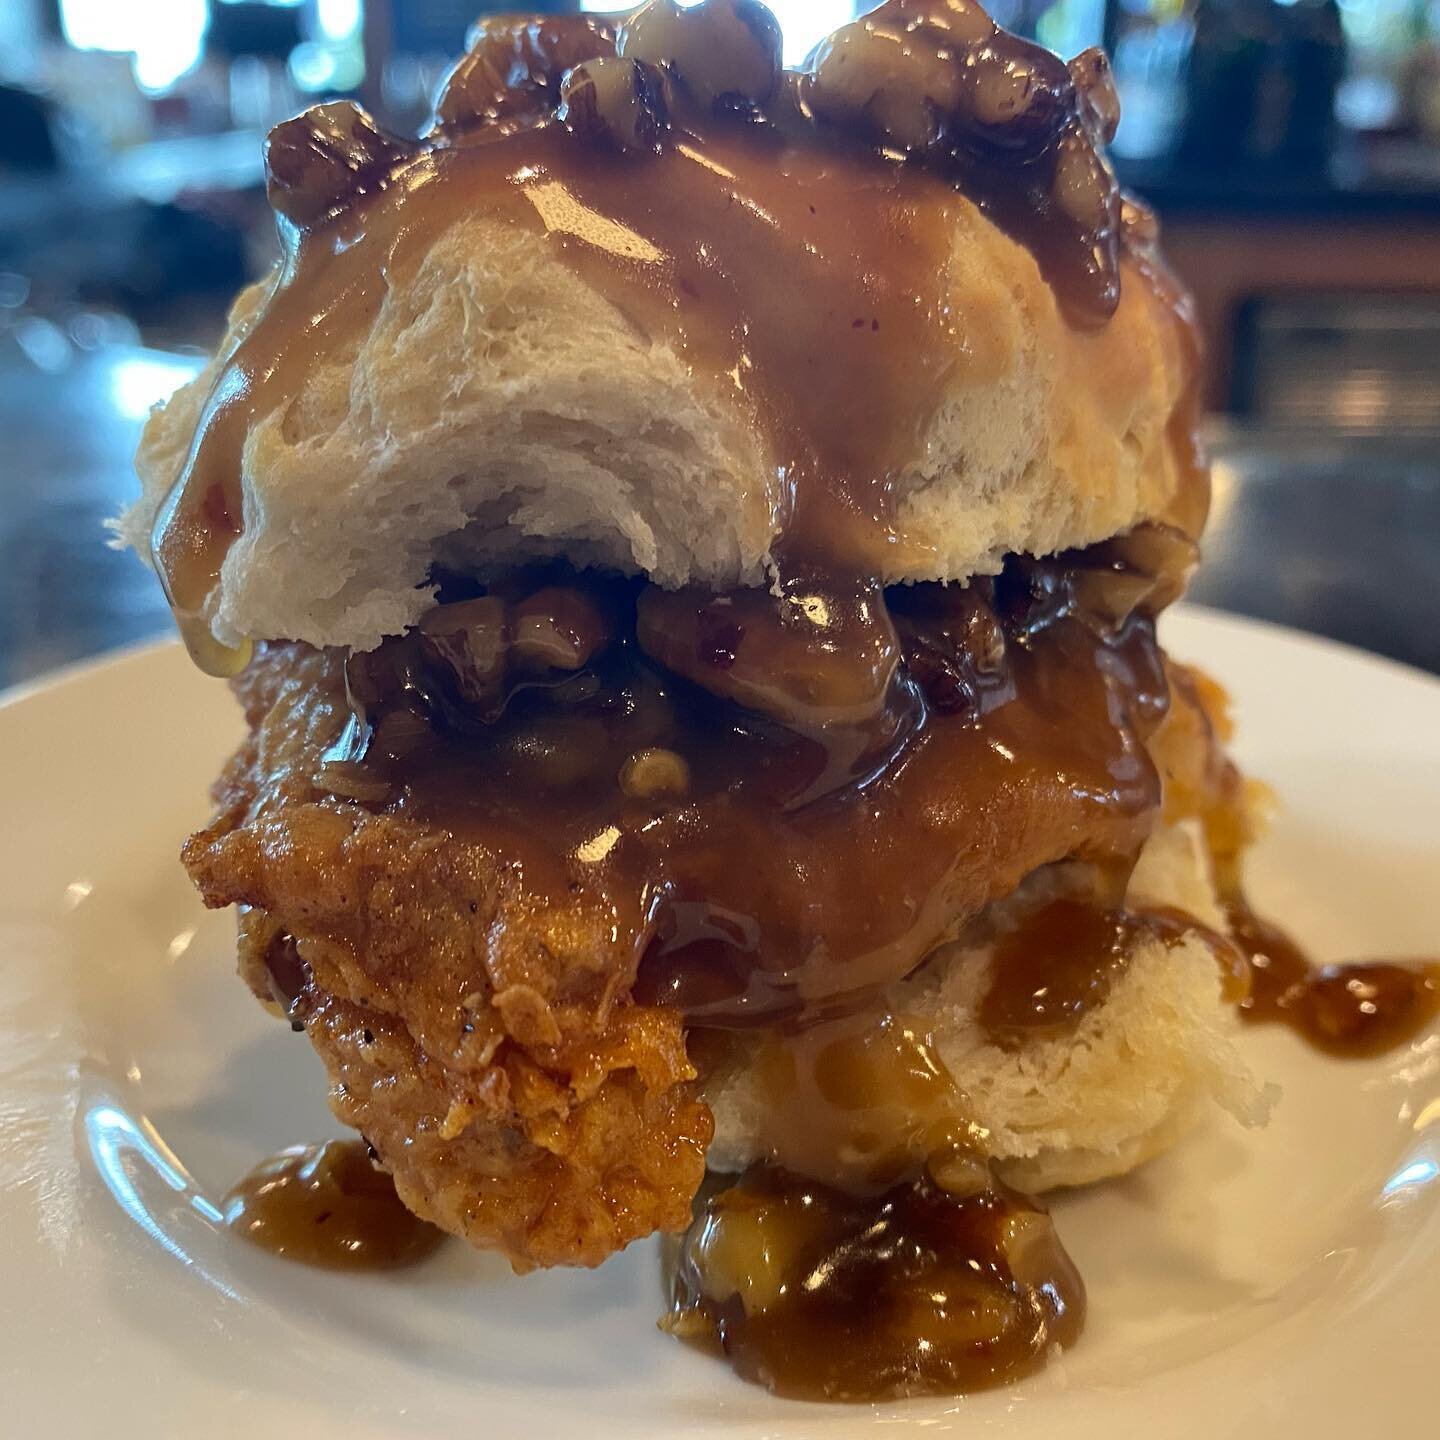 NEW on the Patio feature line-up 🍽 is our SOON to be FAMOUS 🔥Southern Fried Chicken 🐓 Biscuit with a Spicy 🌶 Praline Sauce drizzled 🥄 on top. 🤩